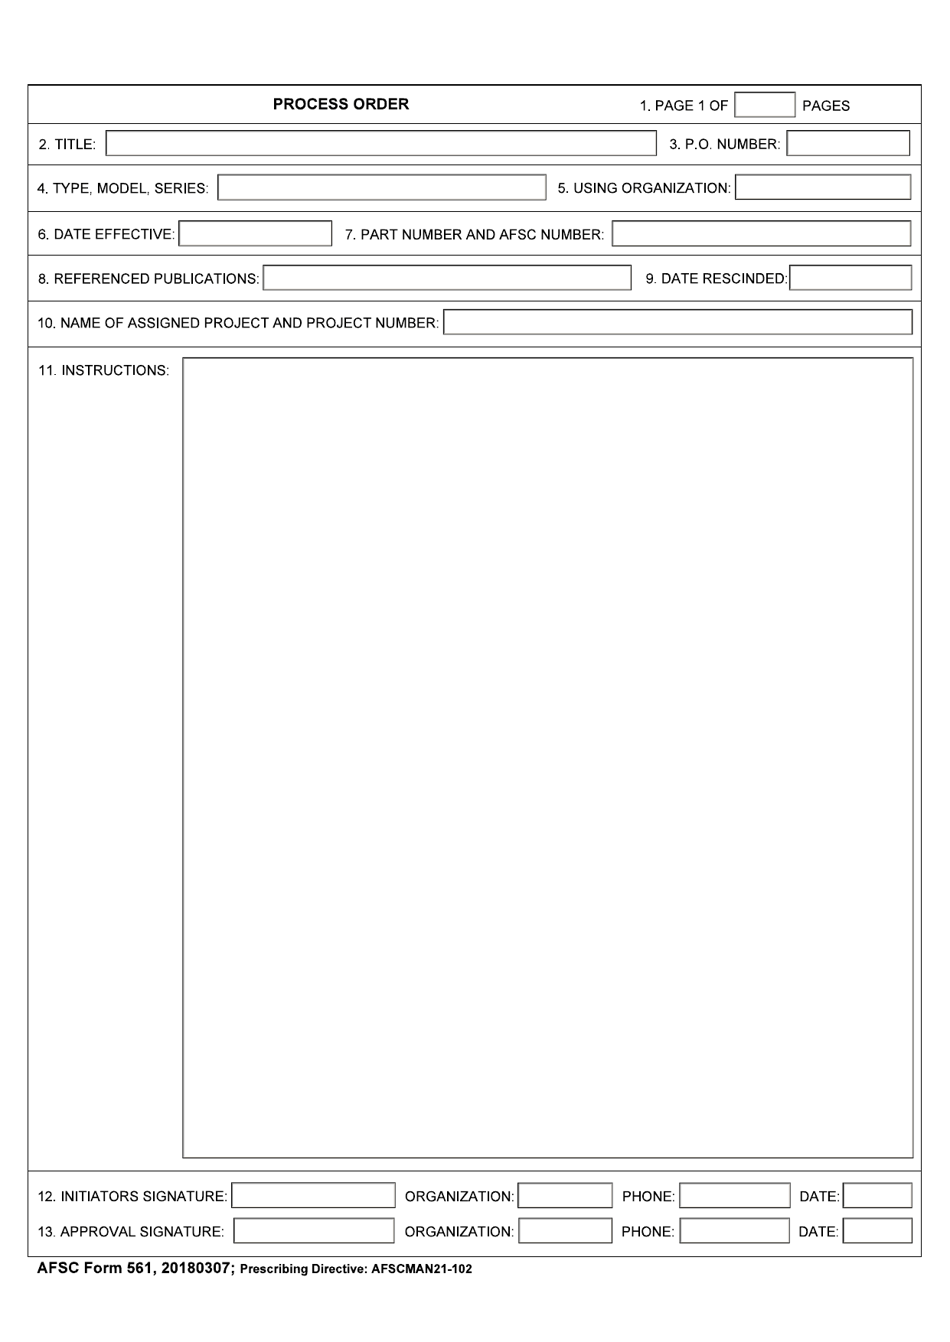 AFSC Form 561 Process Order, Page 1